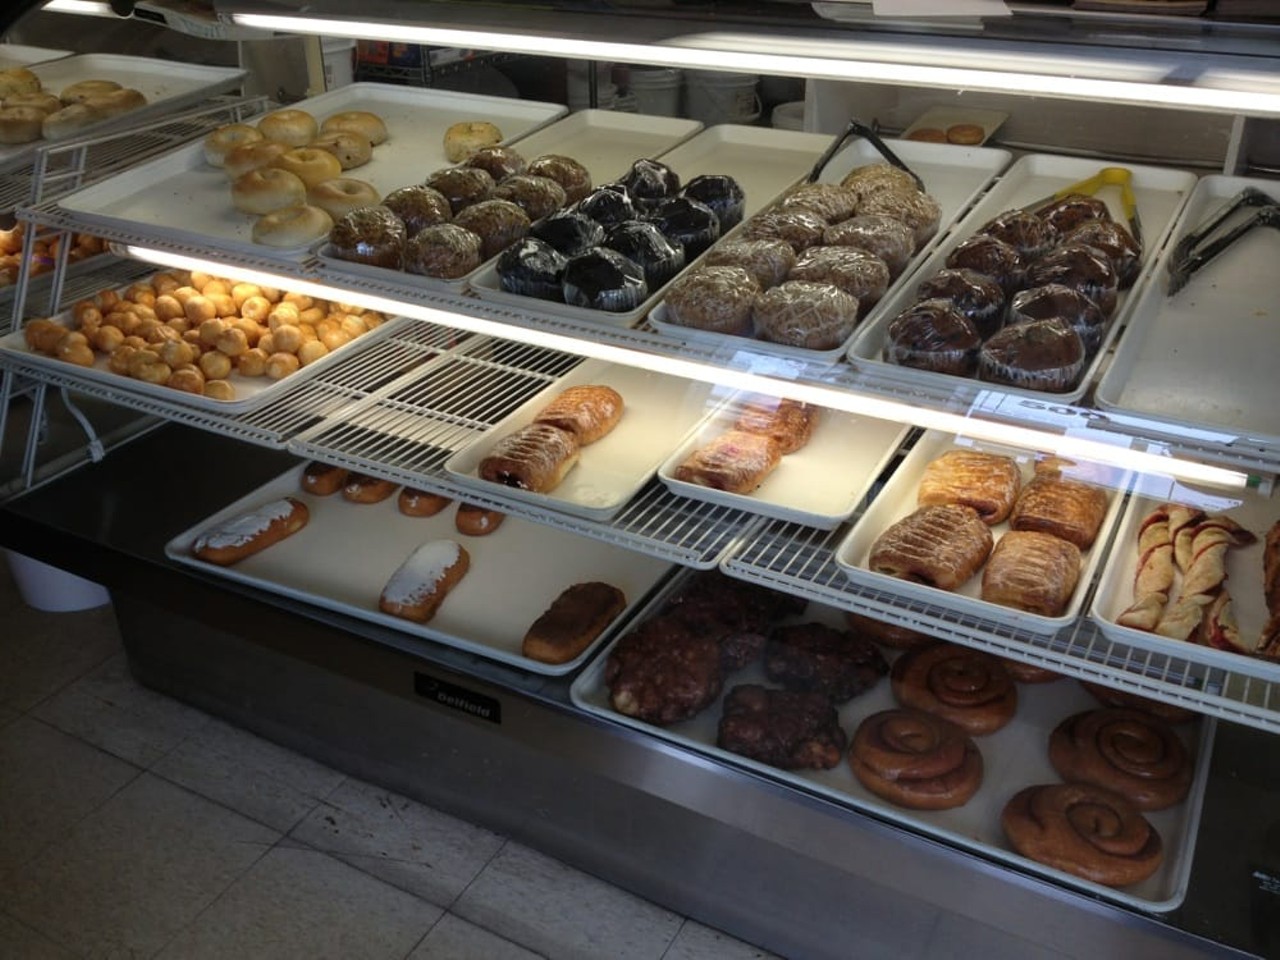  Detroit Doughnuts
Location: 11660 E 11 Mile Rd, Warren
Hours: 4:30 am-11:00 pm every day